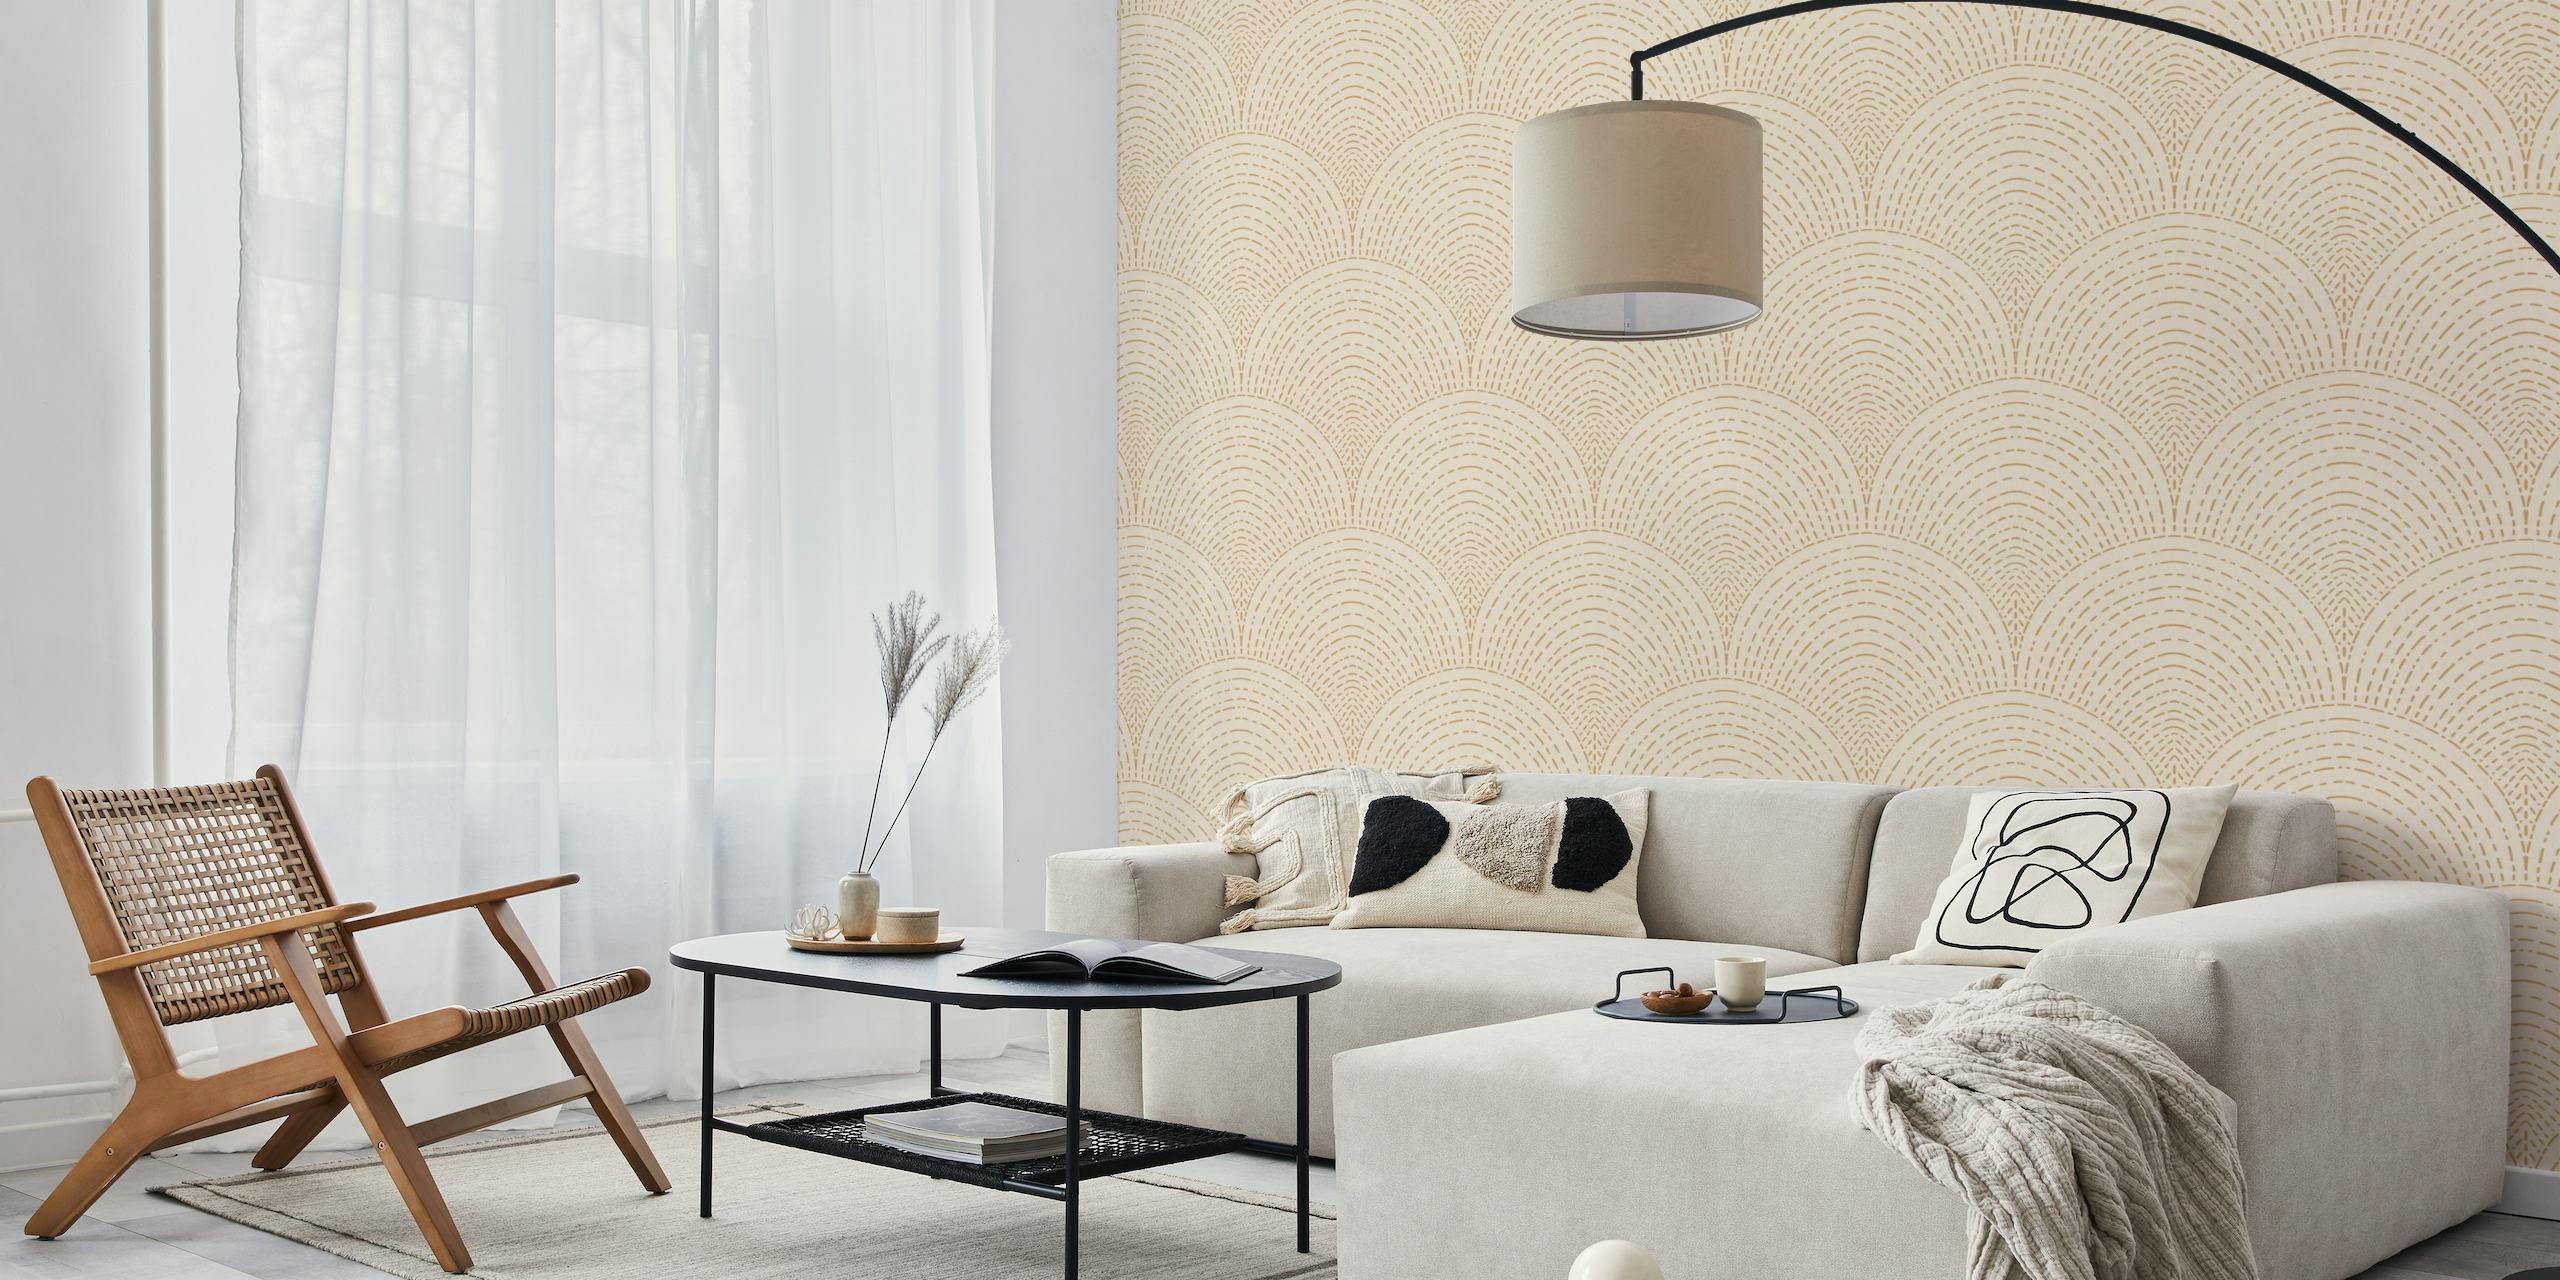 Subtle arches in caramel tones wall mural